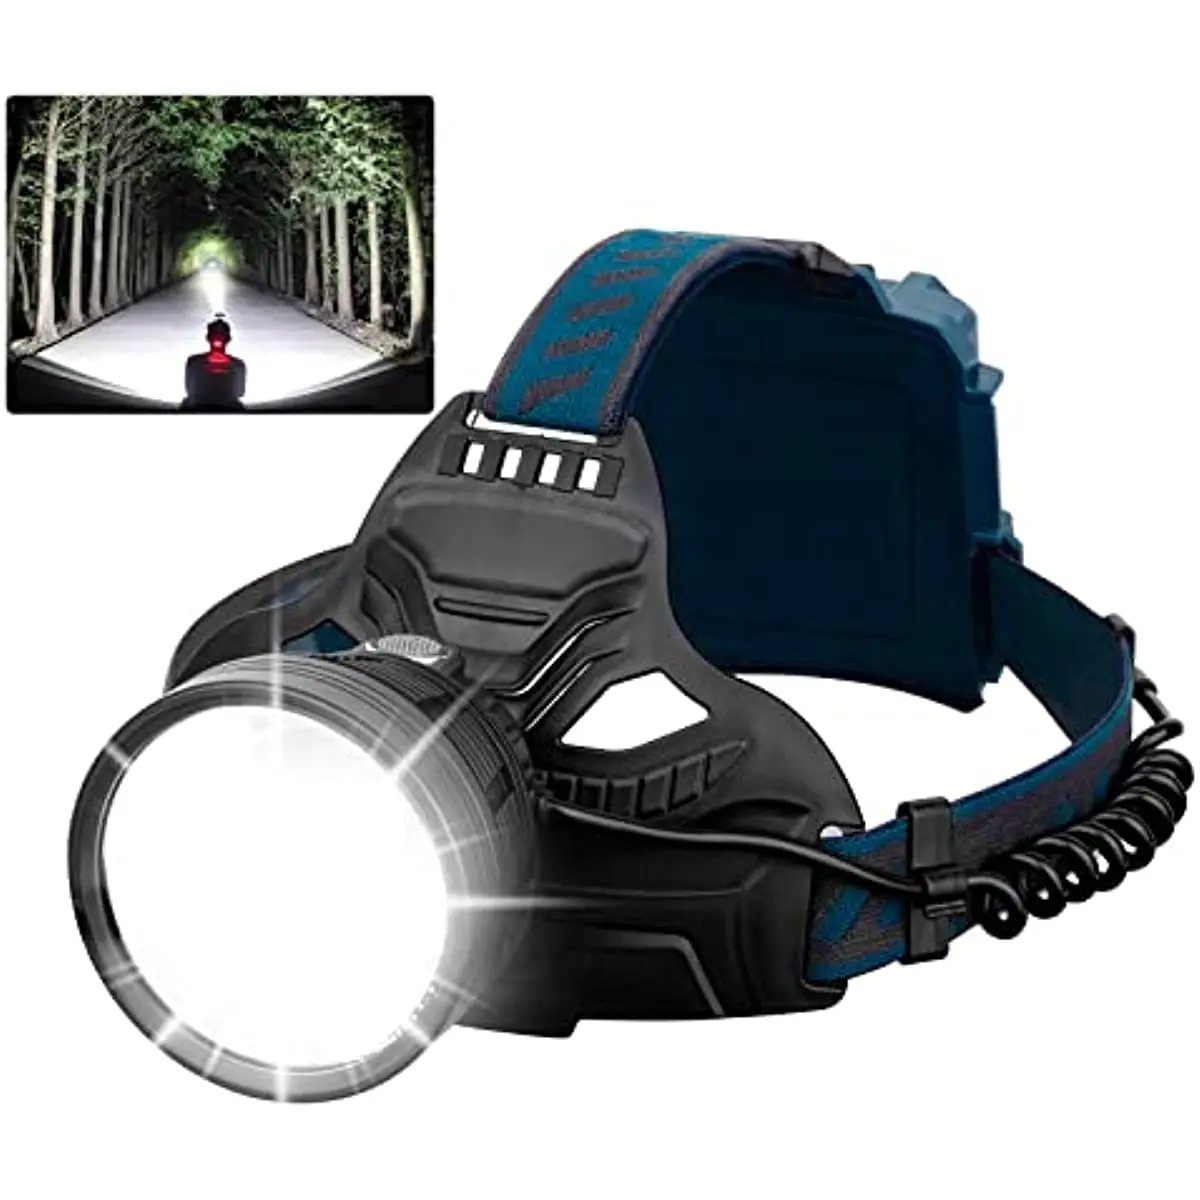 

Headlamps New LED Rechargeable for Adults 90000 Lumen Super Bright Headlamp Flashlight 90 Adjustable 4 Modes IPX5 Waterproof